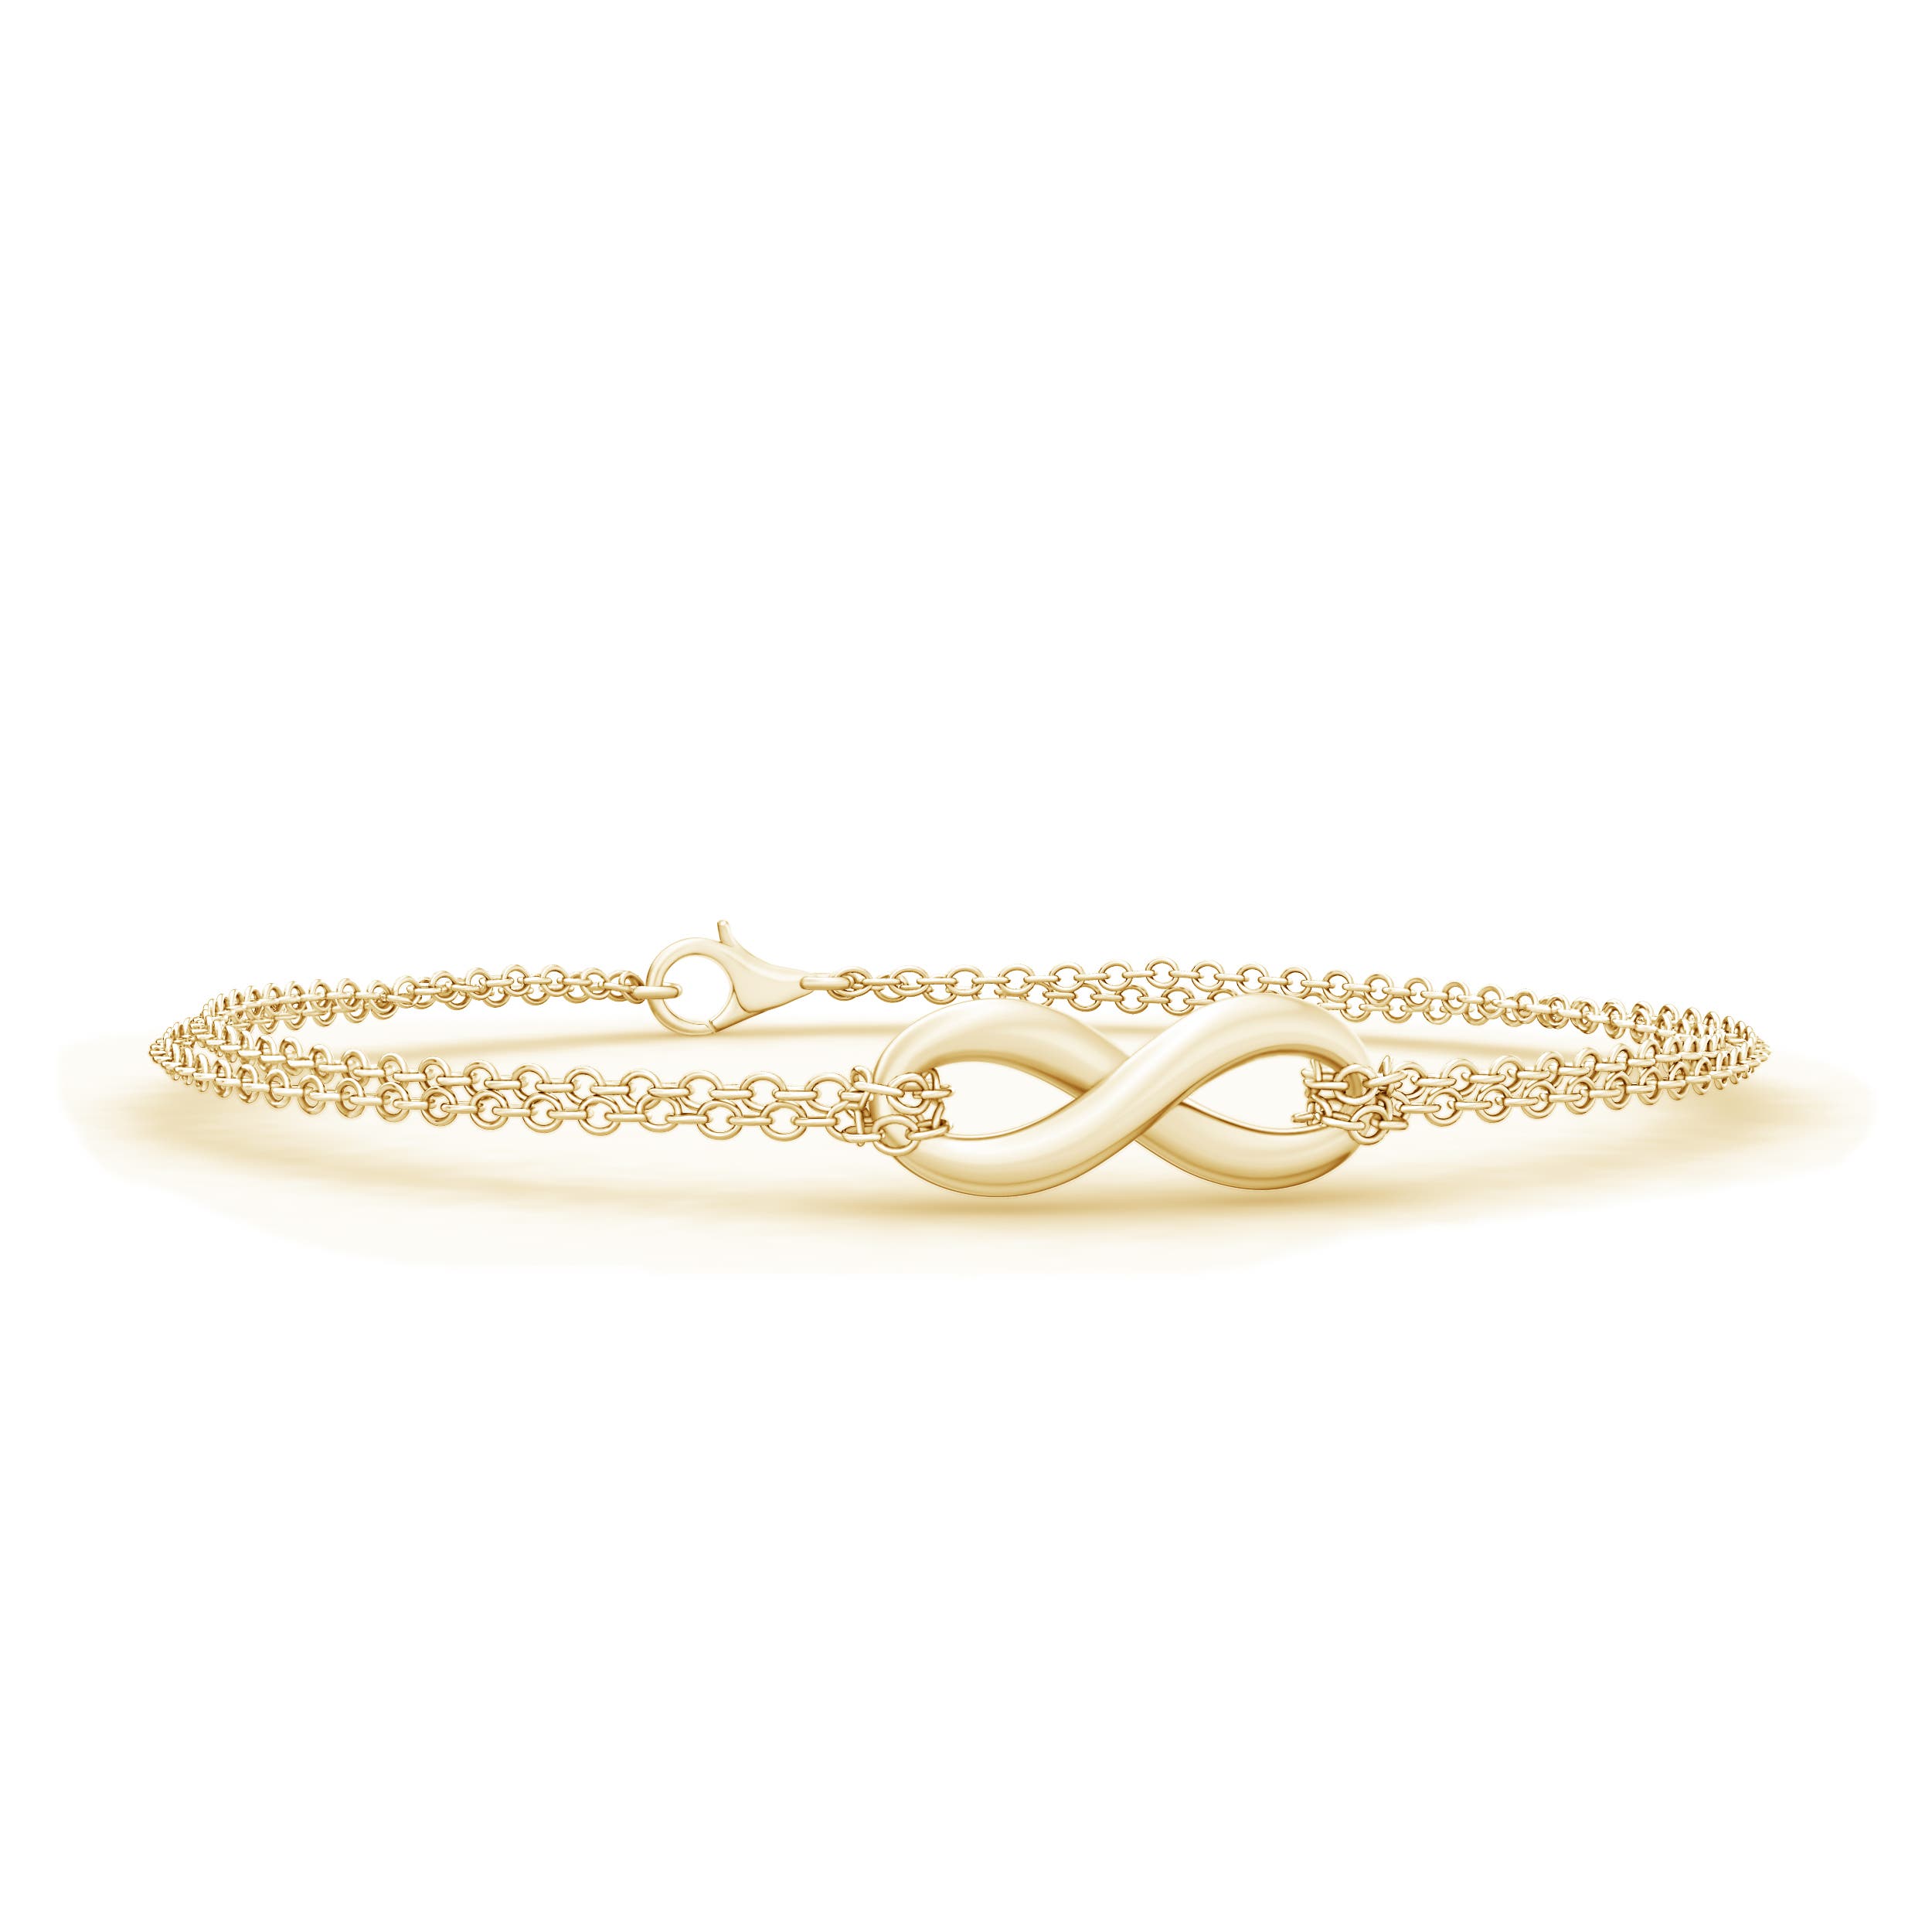 Simpre Cute Crystal Pave Infinity Charm Chain Bracelet in Silver or Gold  Adjustable - www.My… | Gold bracelet for girl, Gold bracelet simple,  Delicate gold bracelet